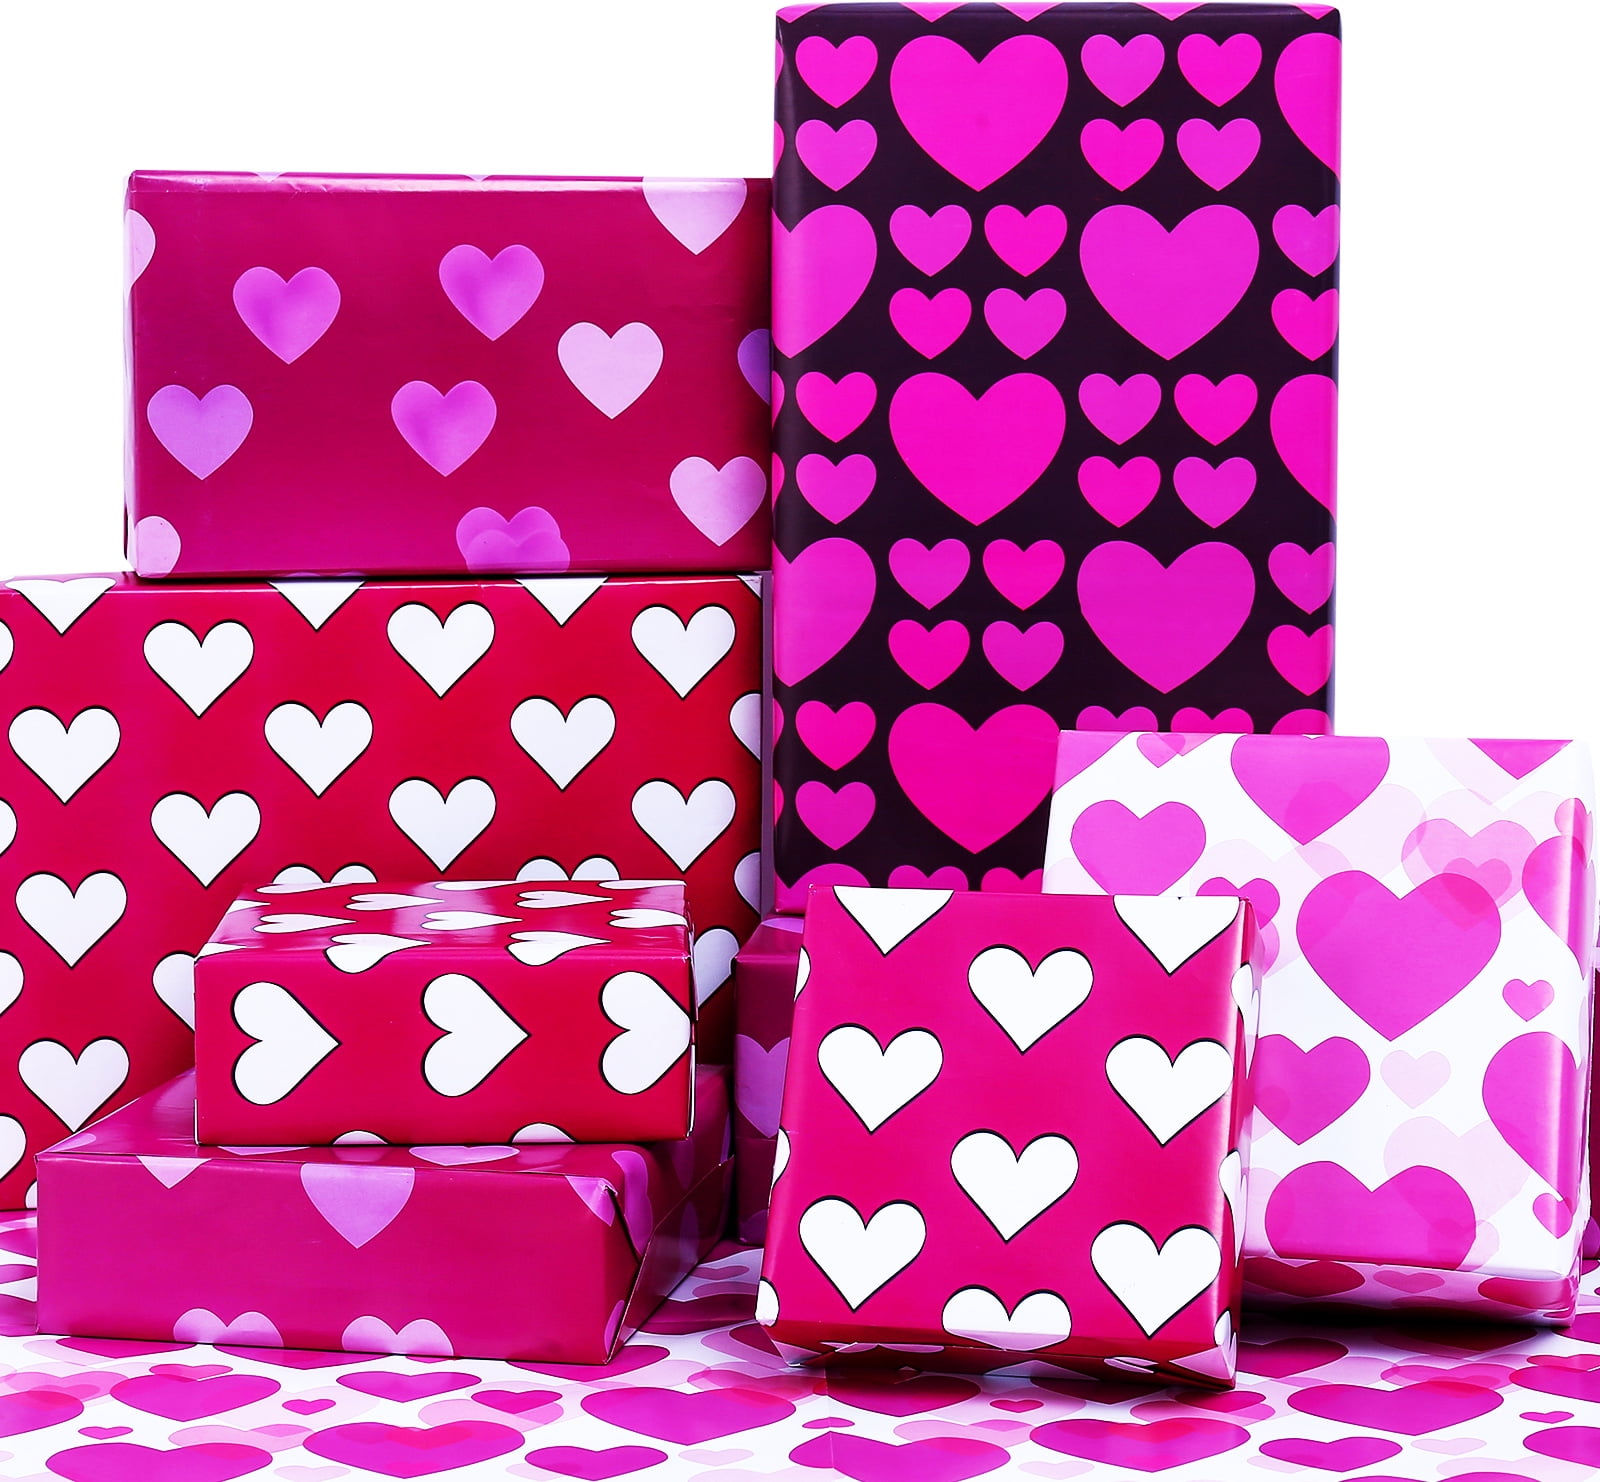 Birthday Wrapping Paper for Girls Women Girfriend - Pink Heart Gift Wrap  Paper for Mothers Day Wedding Bridal Shower Valentines Day - 10 Sheets,  20x29 inch 